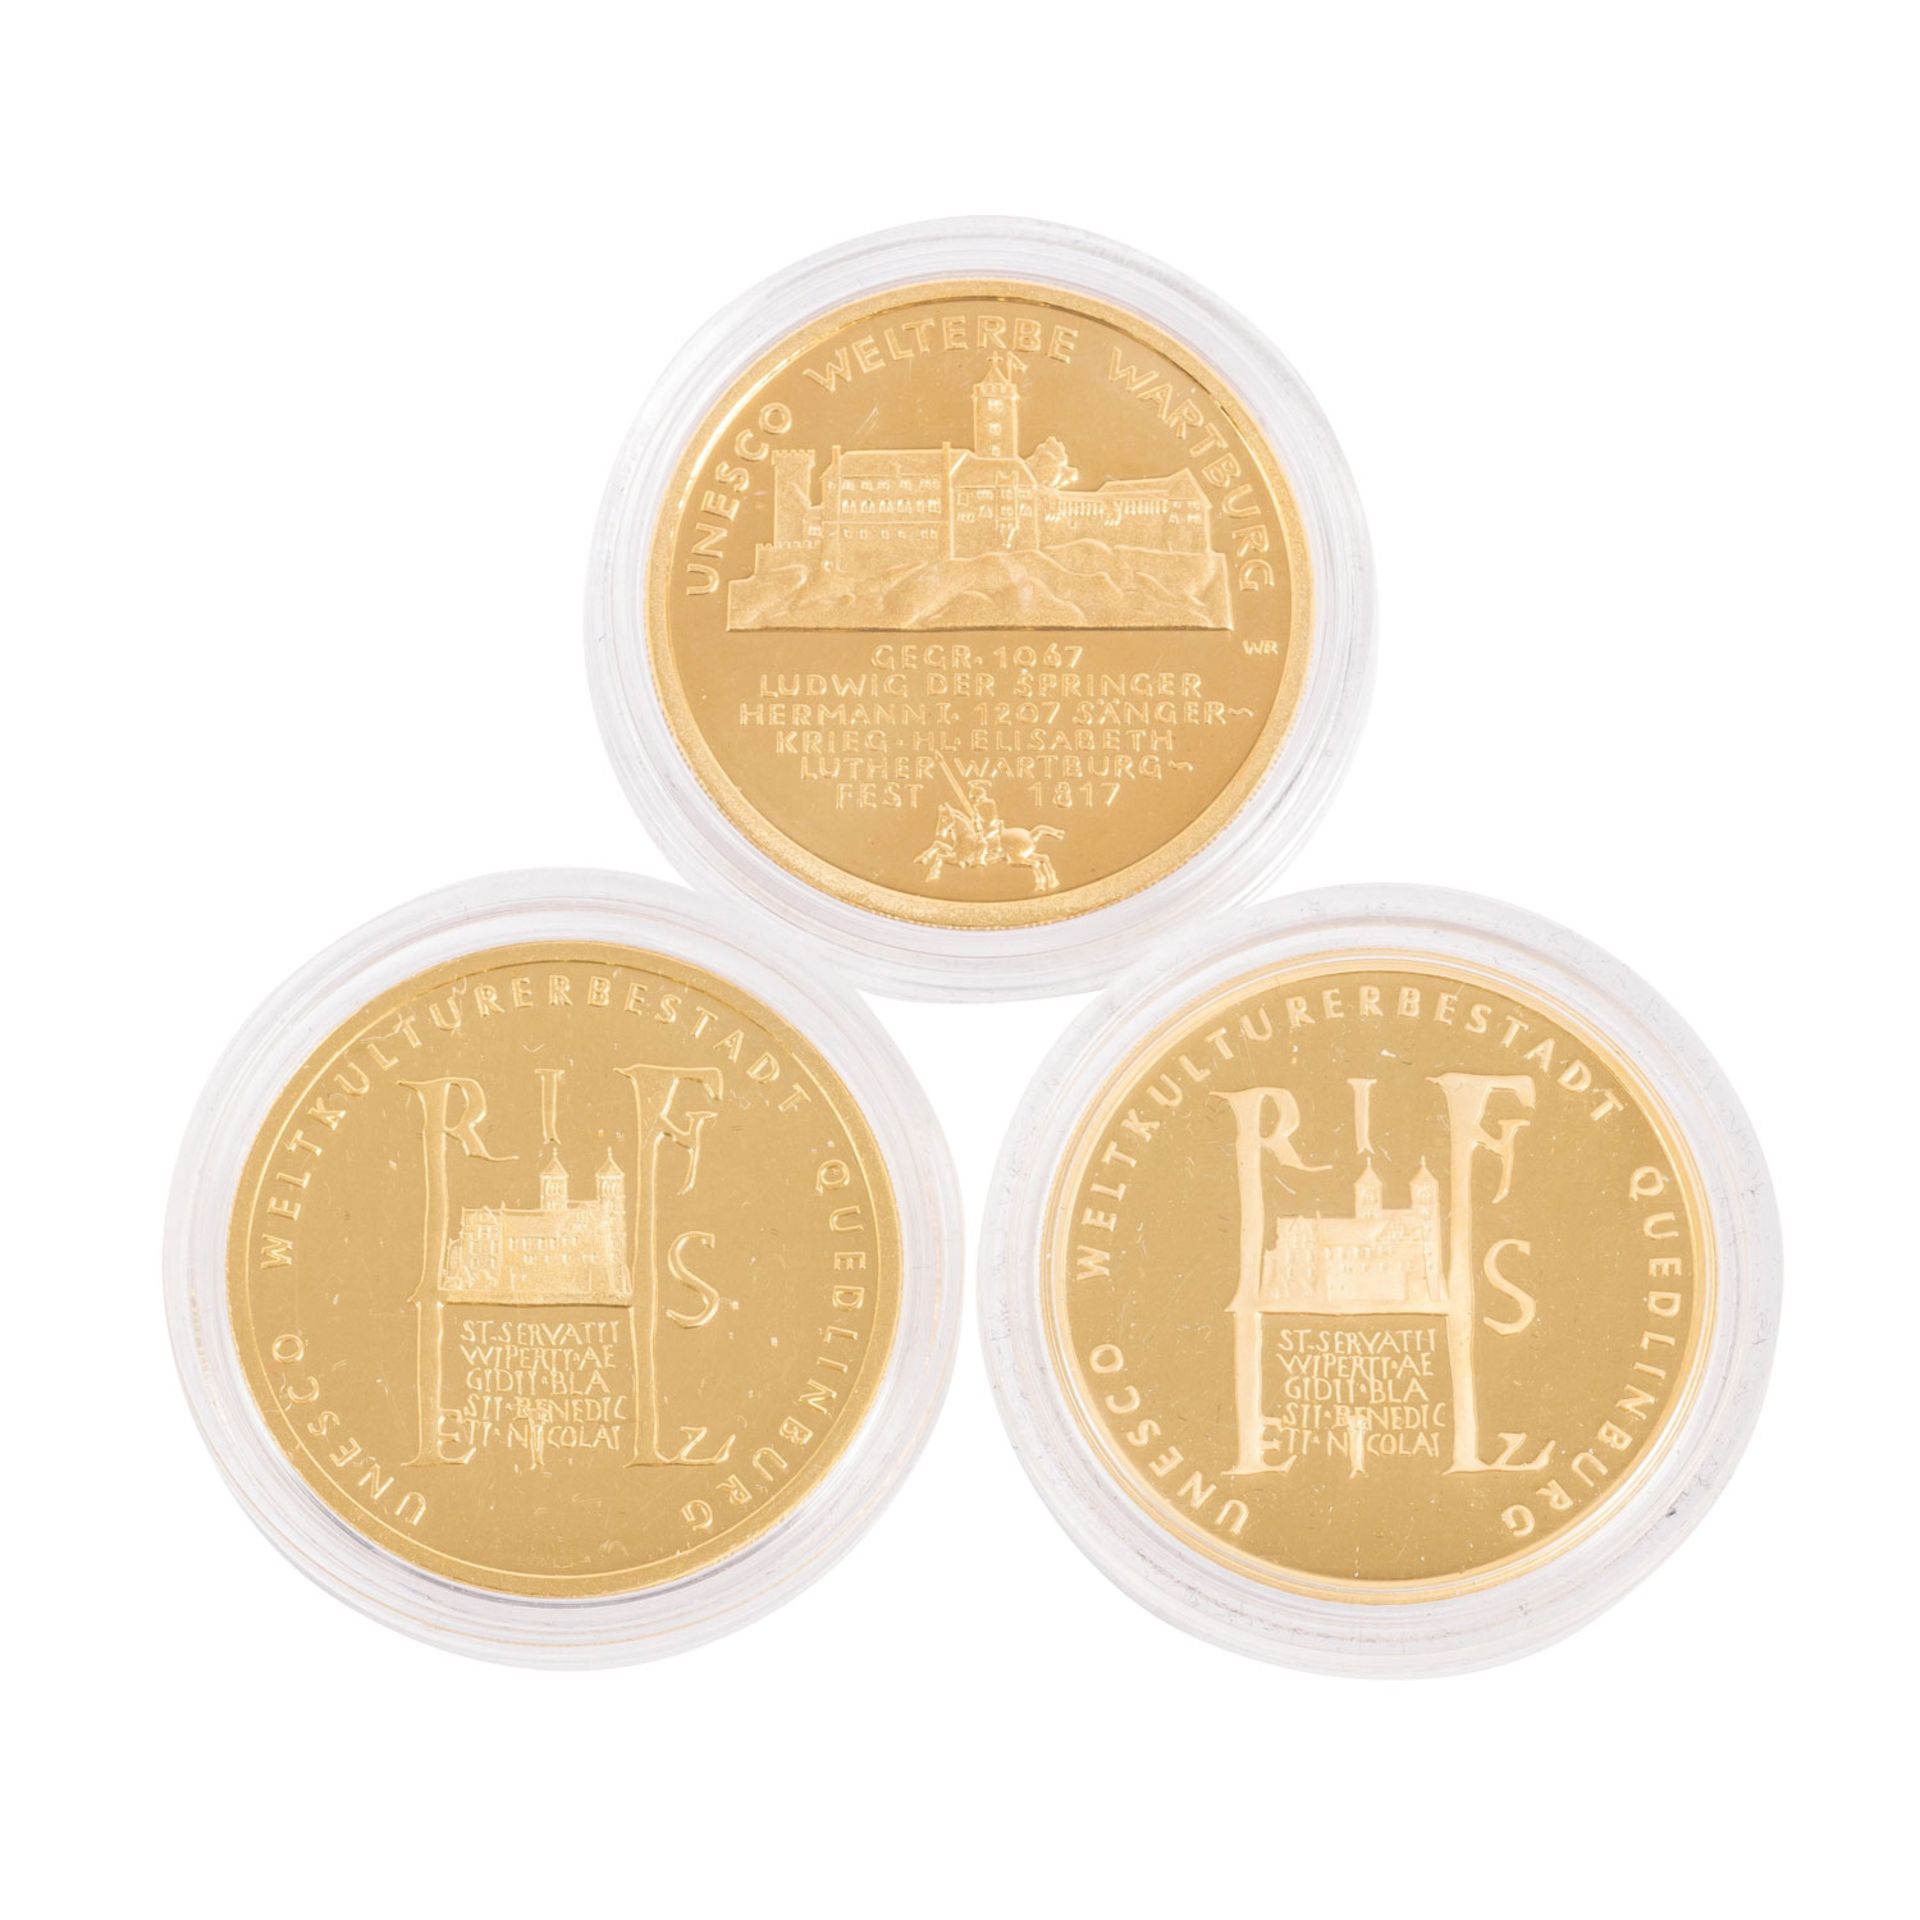 BRD 15 x 100€ in GOLD - - Image 5 of 5